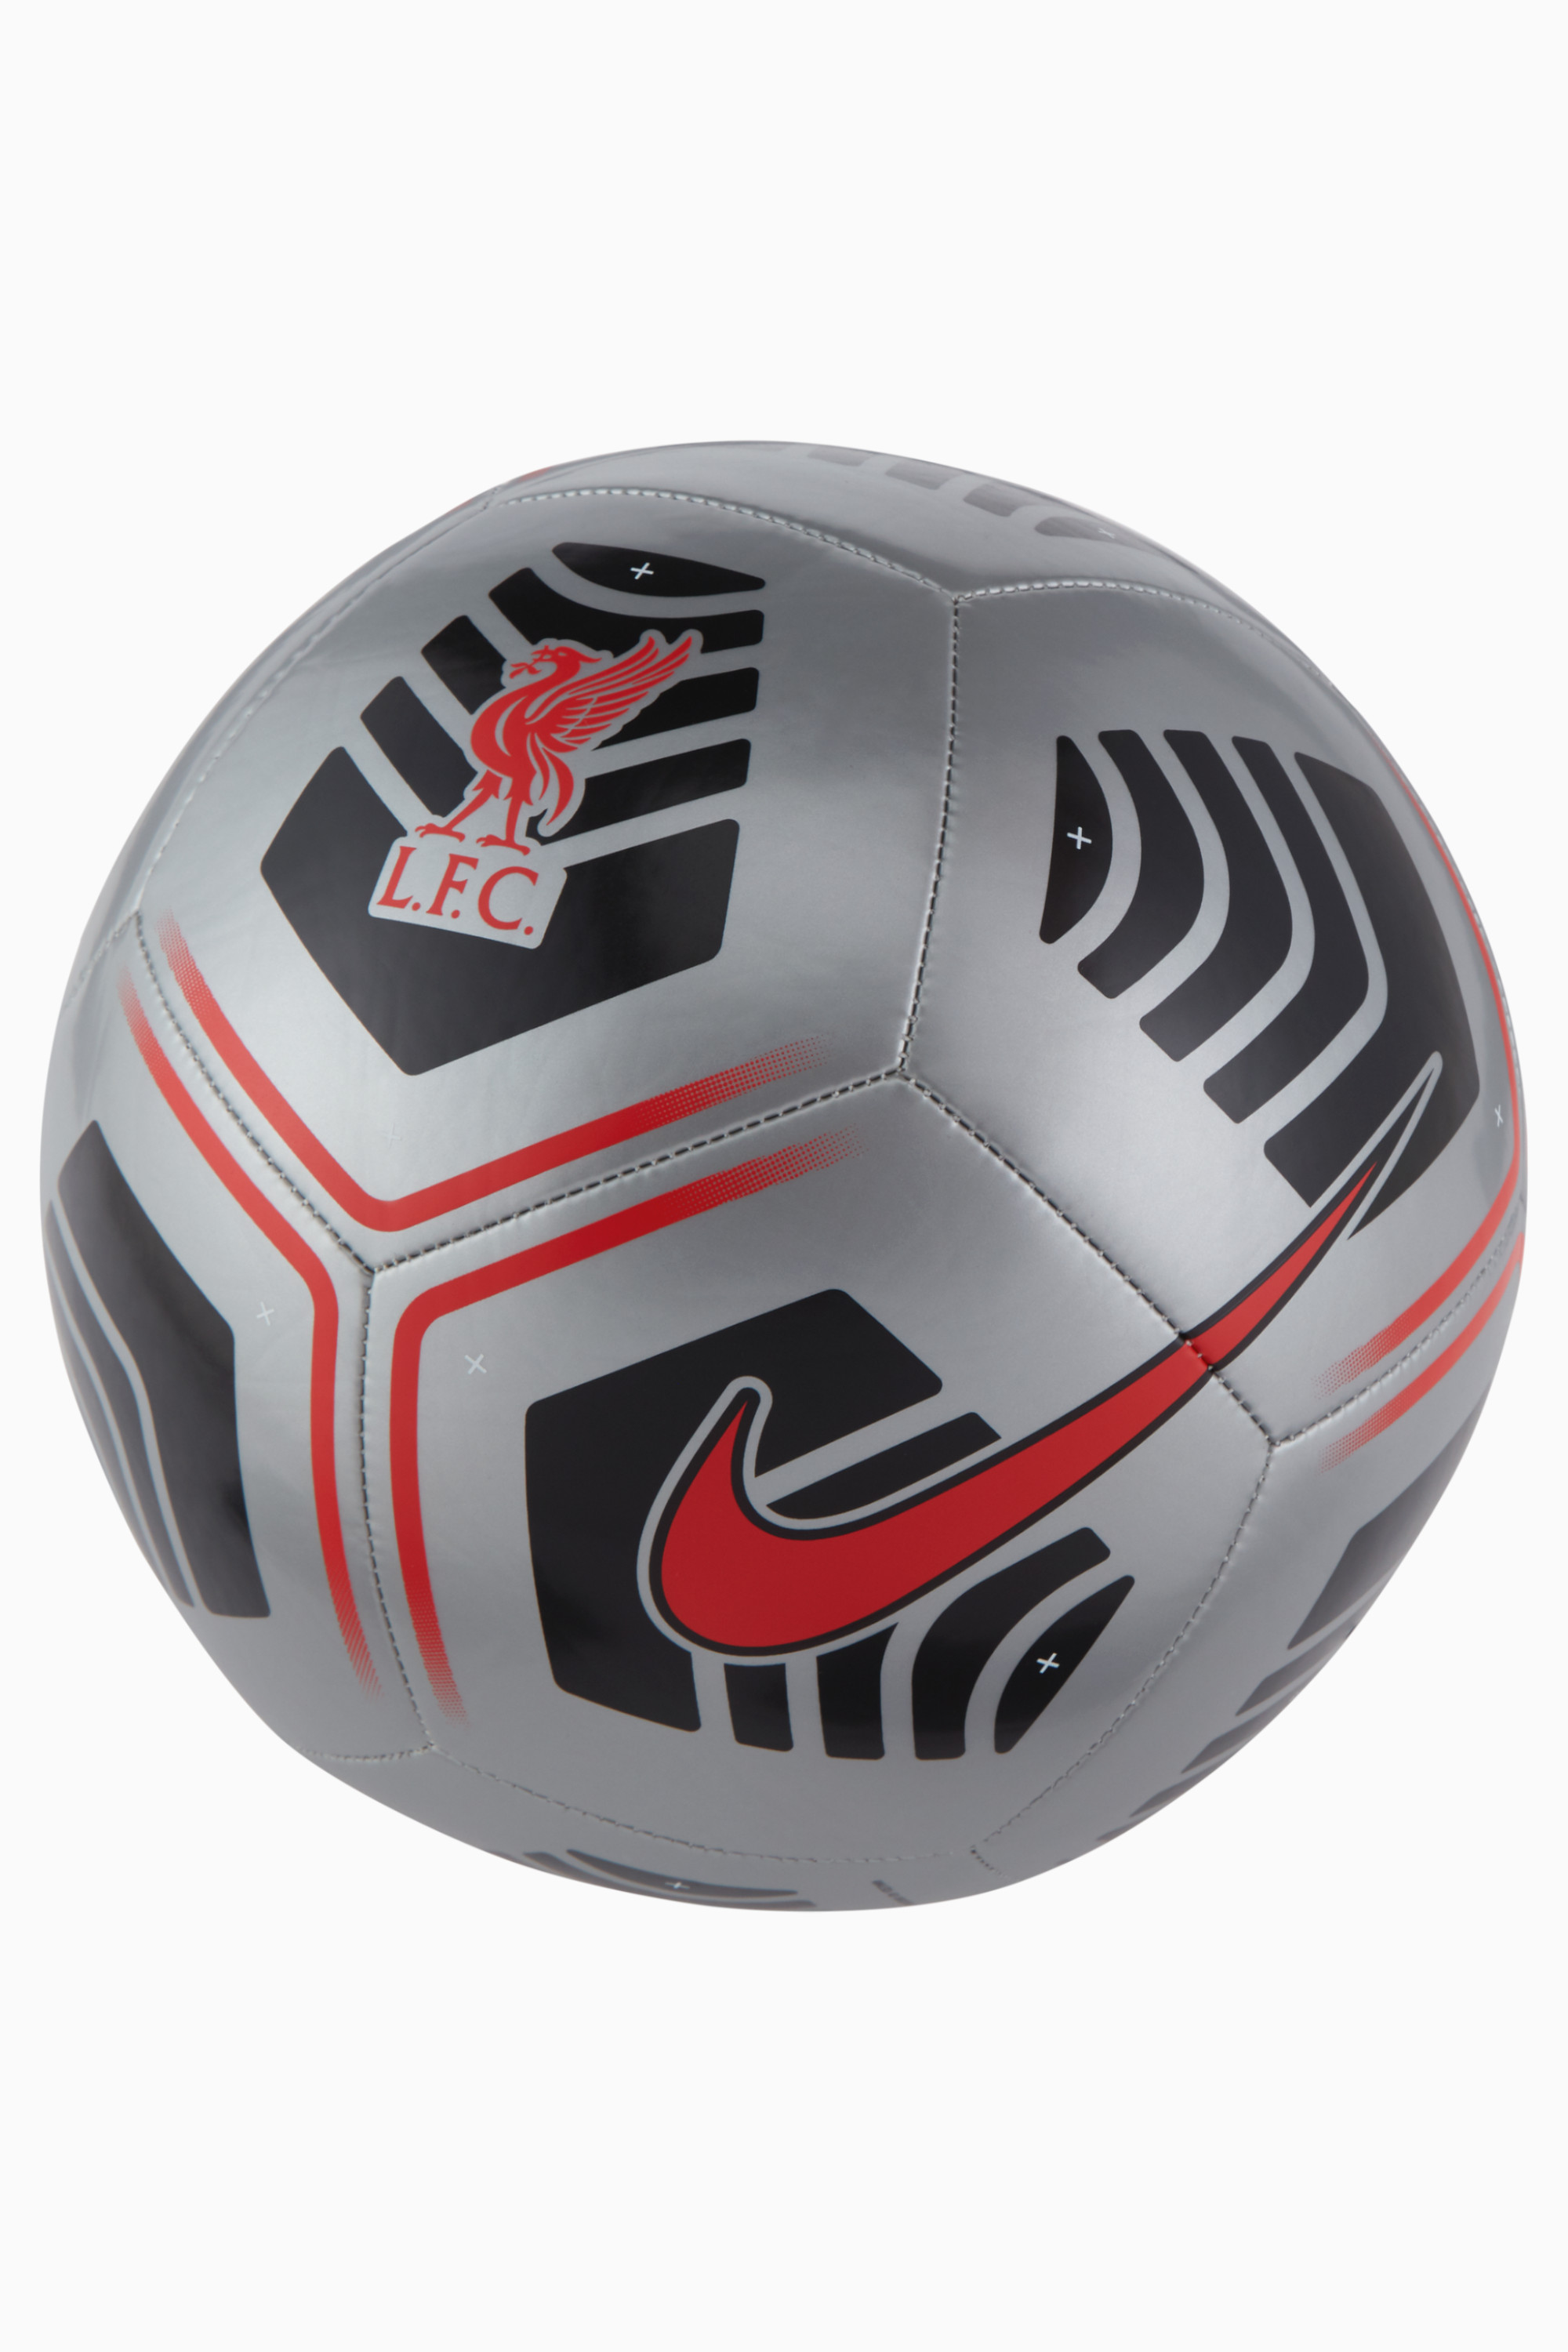 Ball Nike Liverpool FC Pitch size 3 | R 